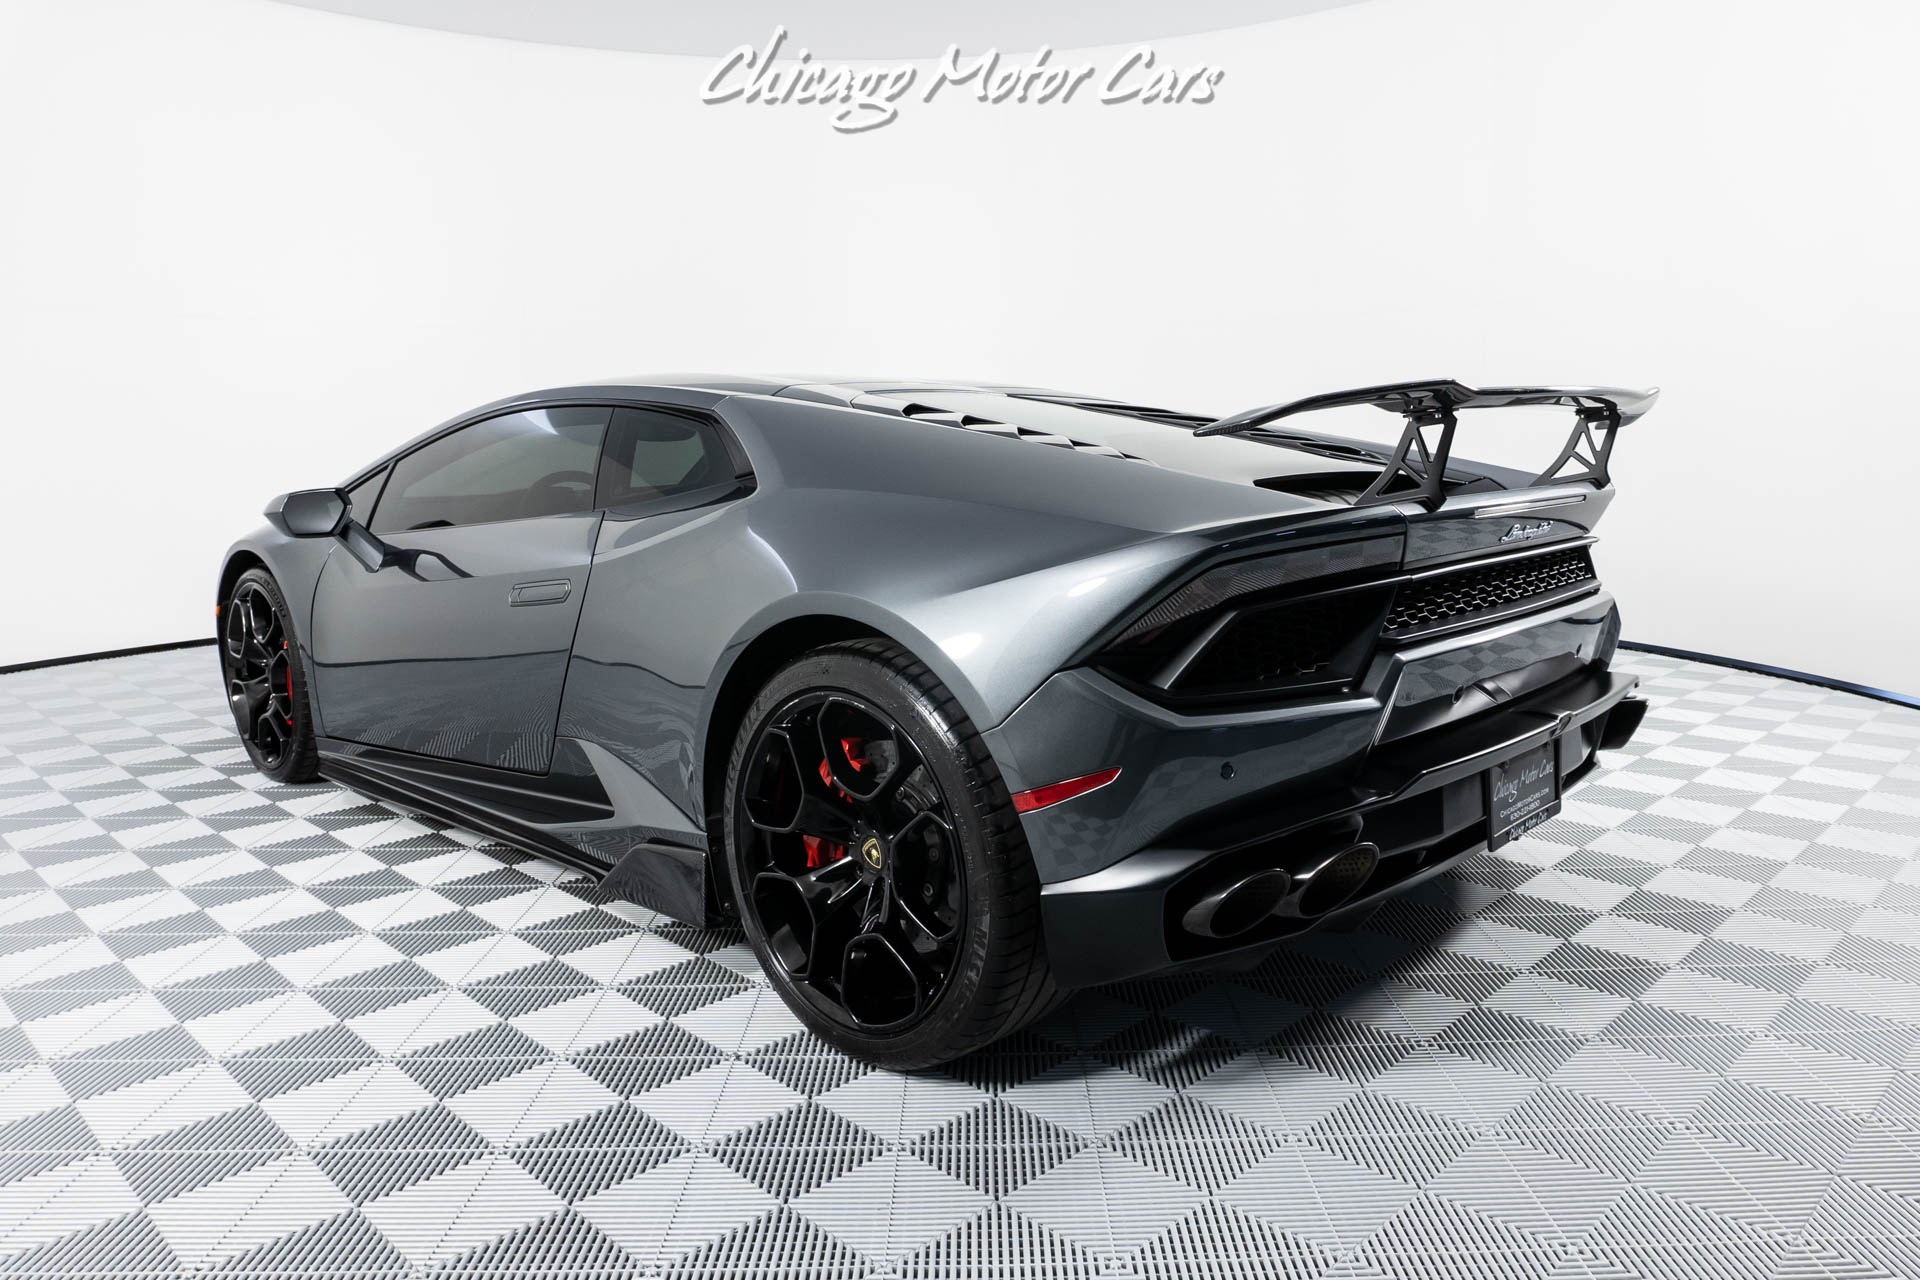 Used-2016-Lamborghini-Huracan-LP580-2-COUPE-STYLE-PACKAGE-CARBON-FIBER-WING-LOW-MILES-LOADED